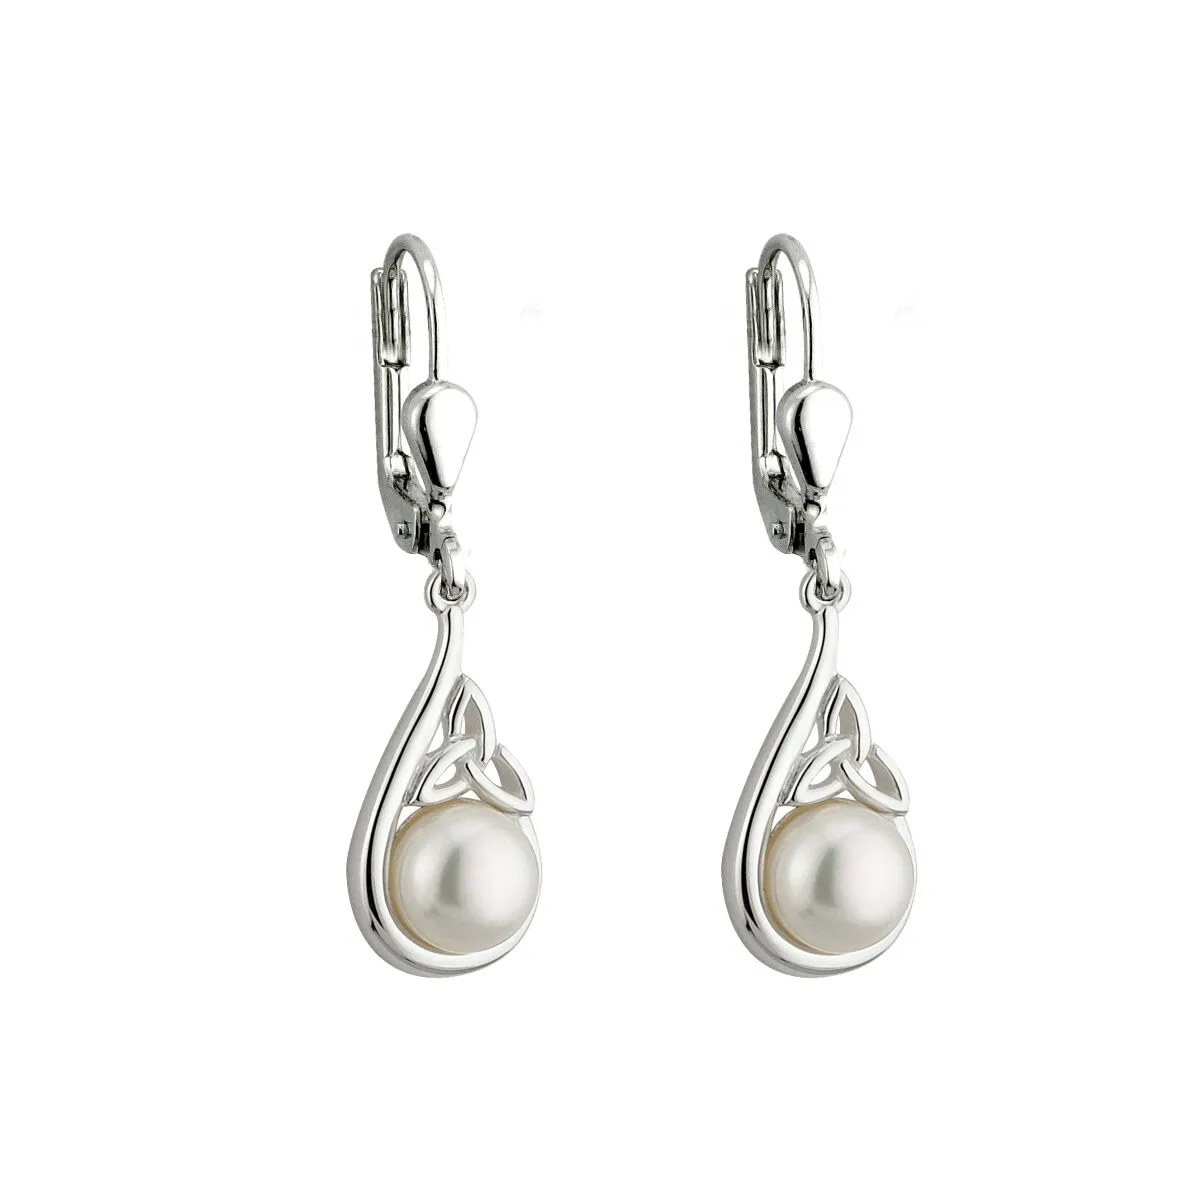 Sterling Silver Trinity Knot Drop Earrings With Freshwater Pearls...